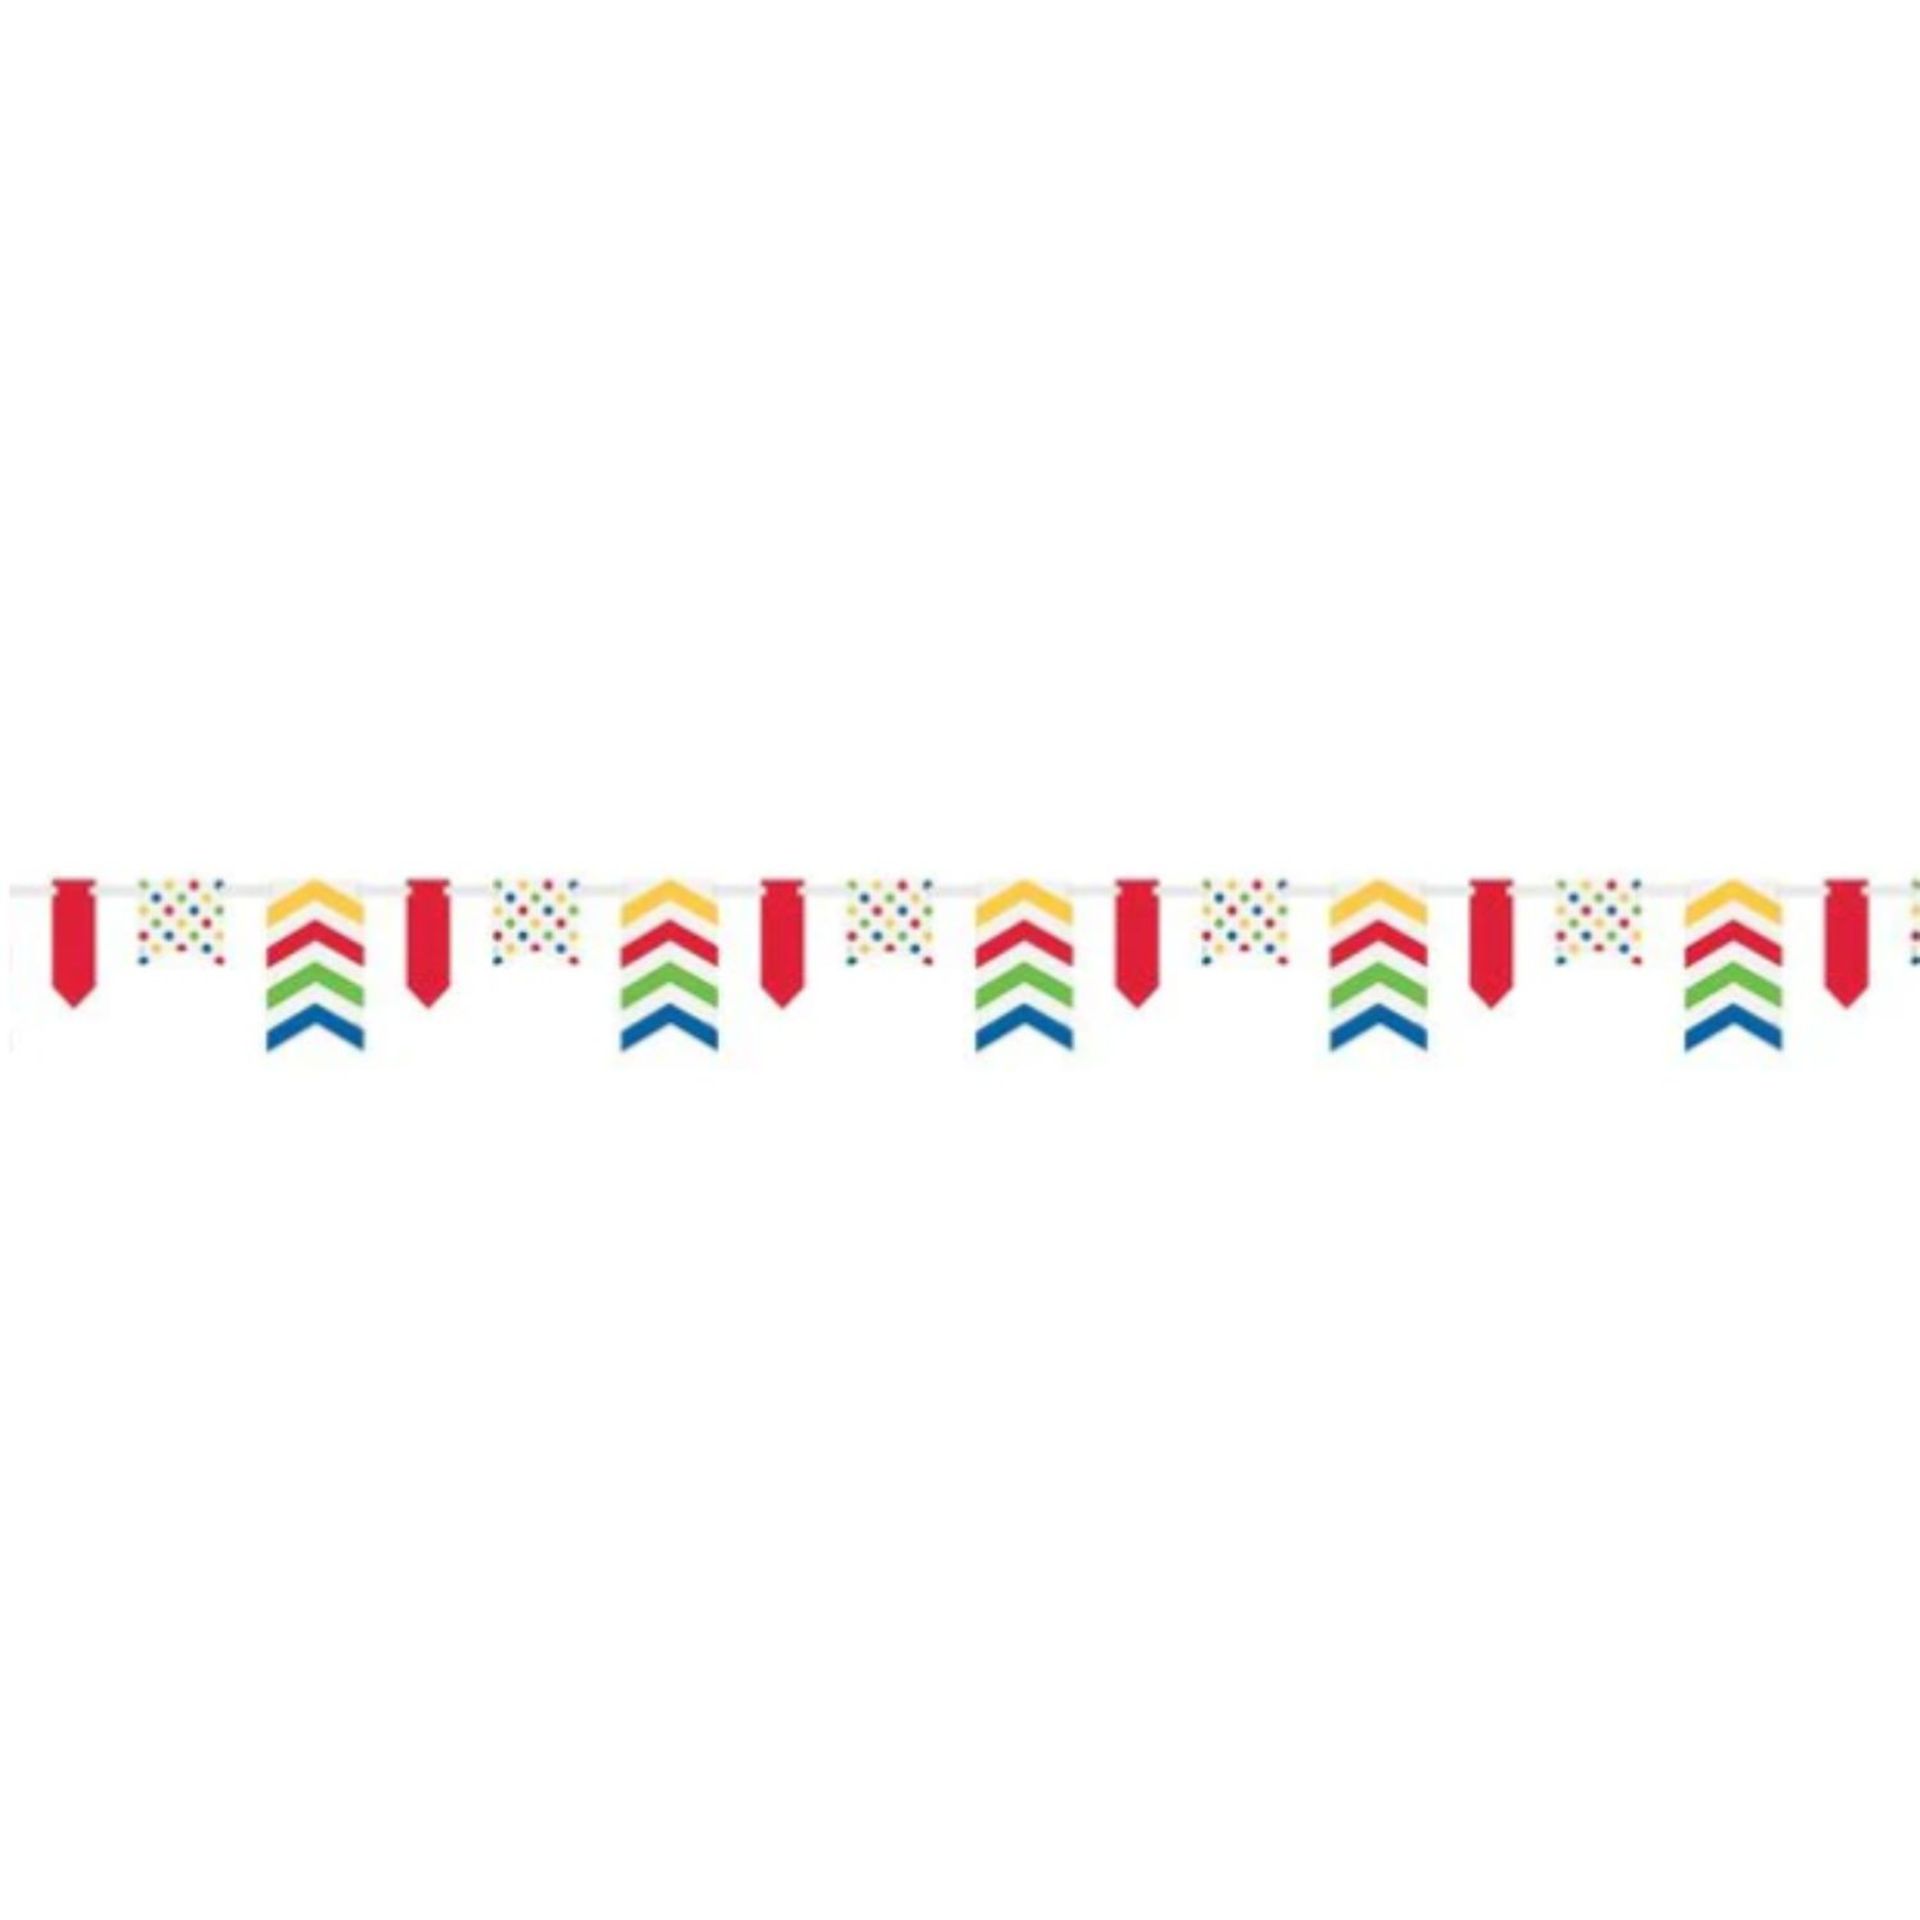 1000 BOLD DOTS 12' CHEVRON PAPER PENNANT BANNER, YELLOW, RED, GREEN & BLUE RRP £10,000 - Image 2 of 2